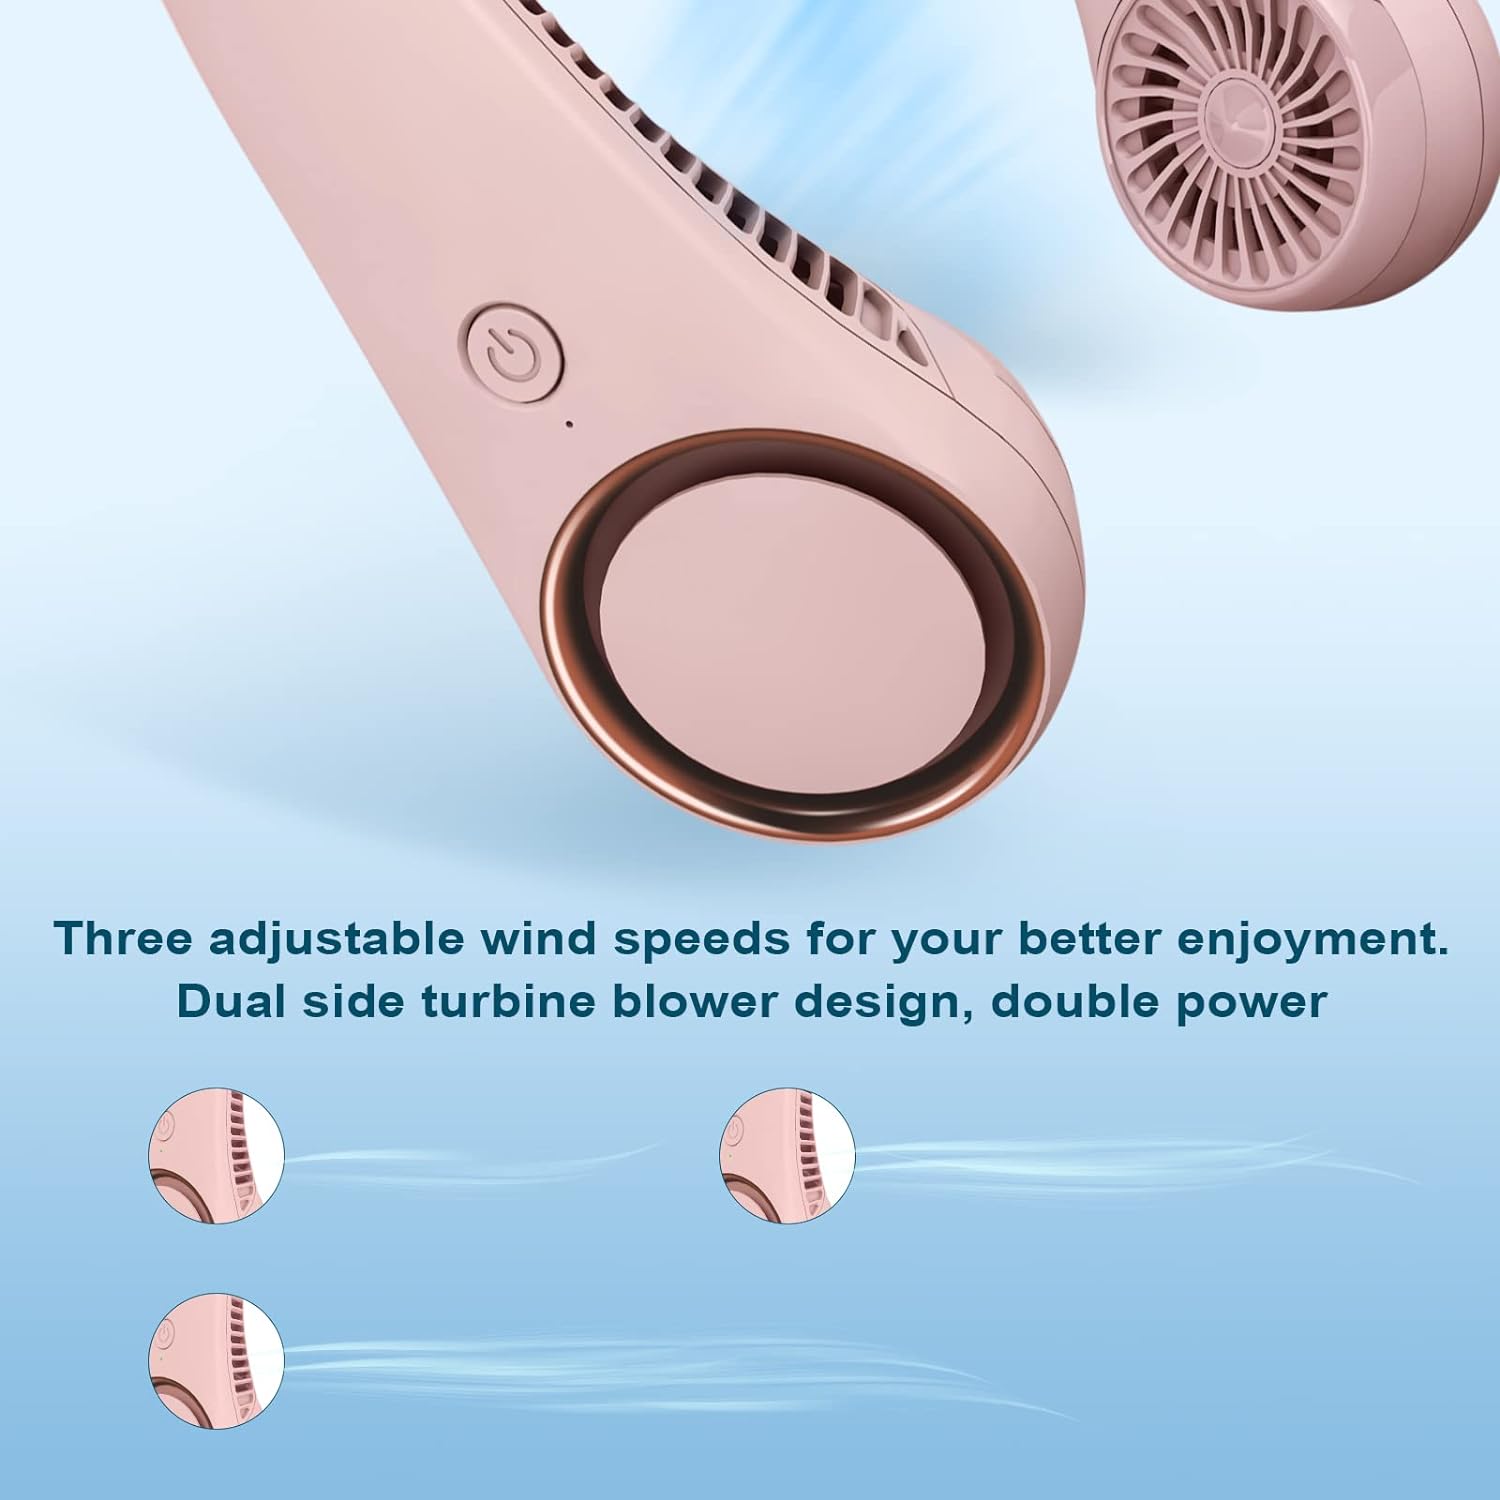 CIVPOWER Portable Neck Fan, Hands Free Bladeless Fan, Cooling Personal Fan,3 Speeds Adjustment,78 Air Outlet, Headphone Design, Rechargeable, USB Powered Neck Fan for Outdoor Indoor-Light Blue